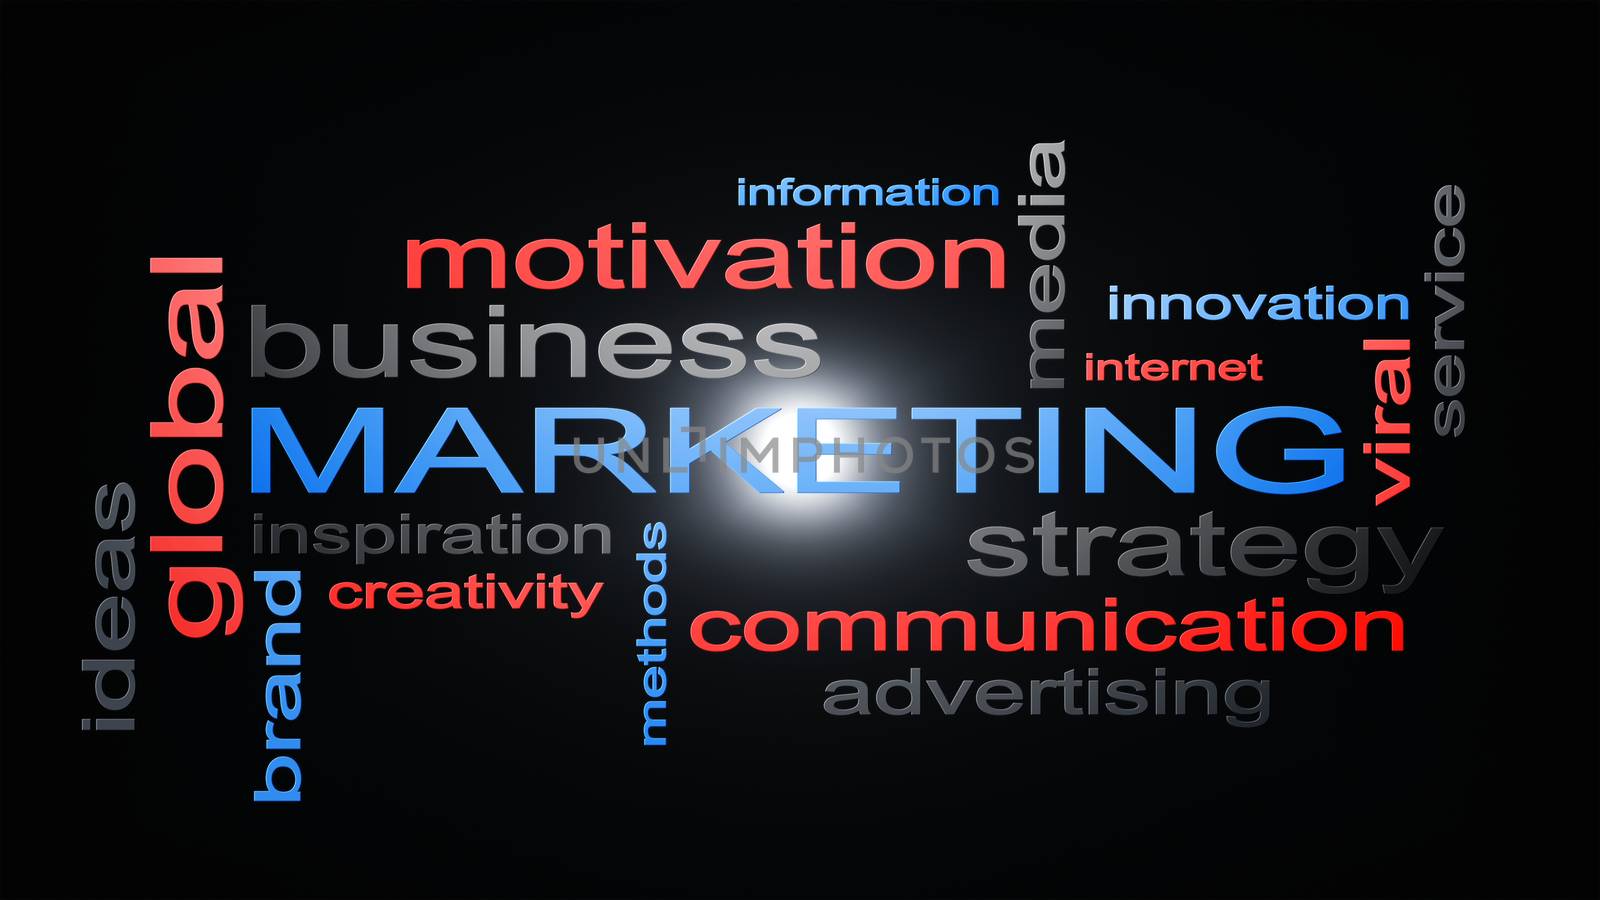 Marketing Business Strategy Word Cloud Text Concept 3D Rendering